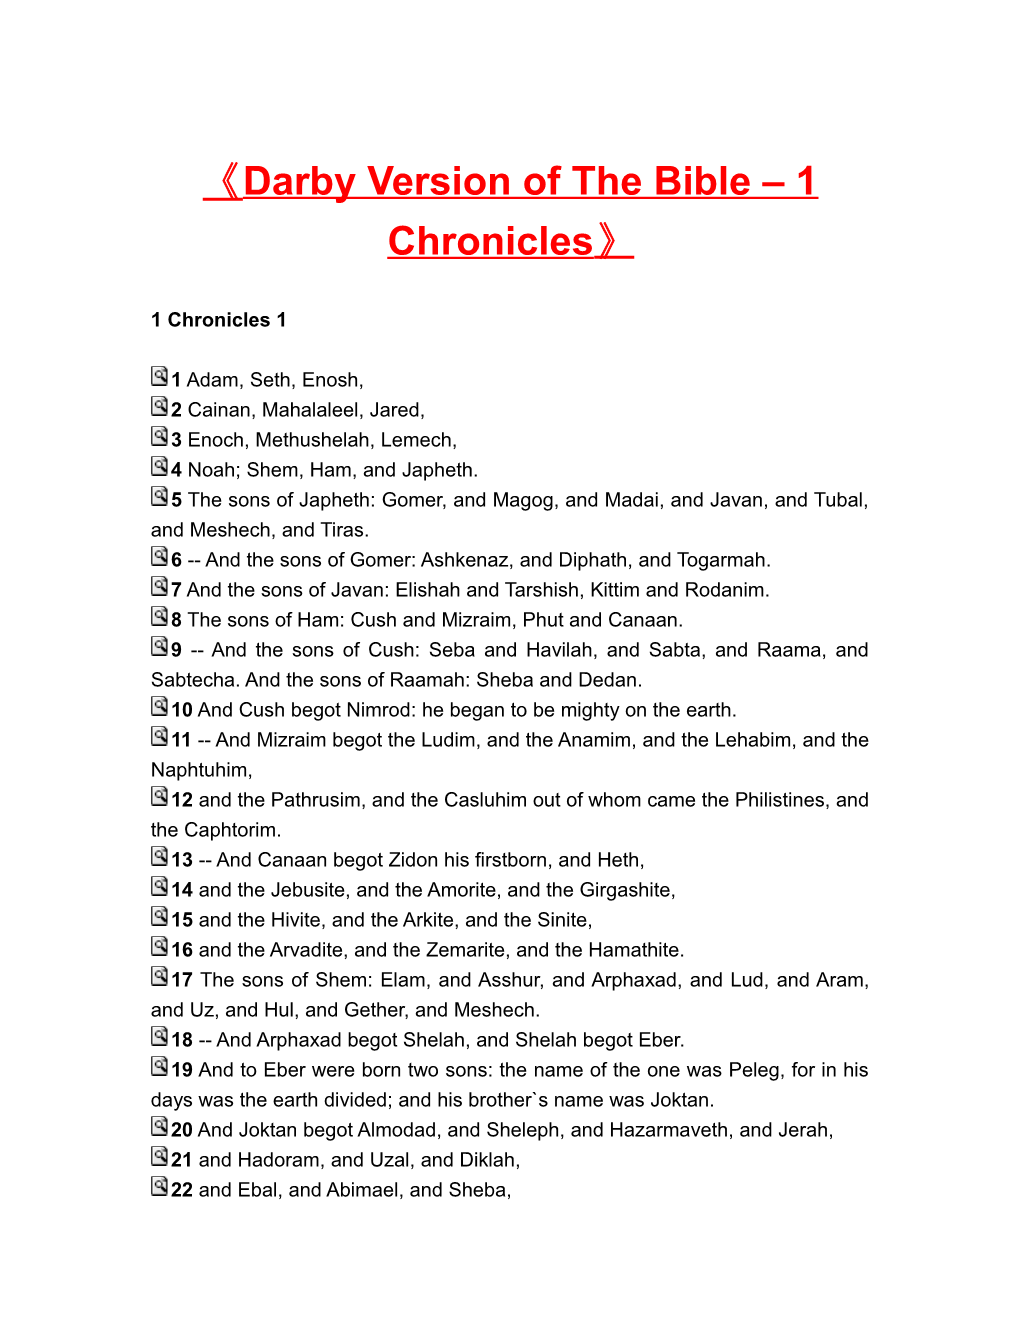 Darby Version of the Bible 1 Chronicles